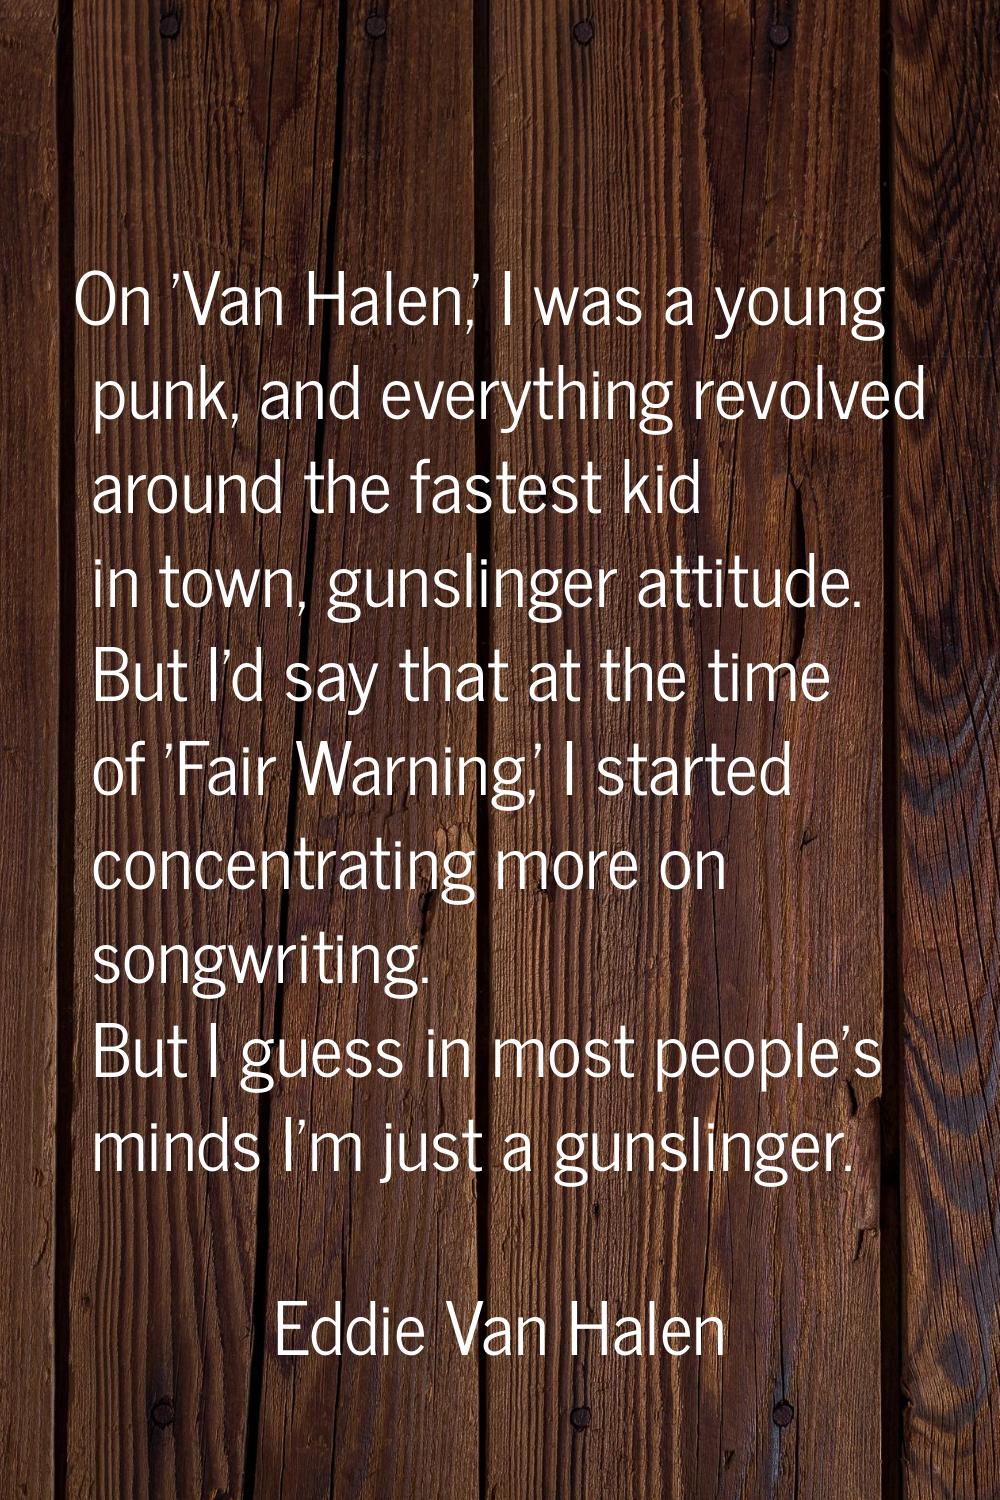 On 'Van Halen,' I was a young punk, and everything revolved around the fastest kid in town, gunslin